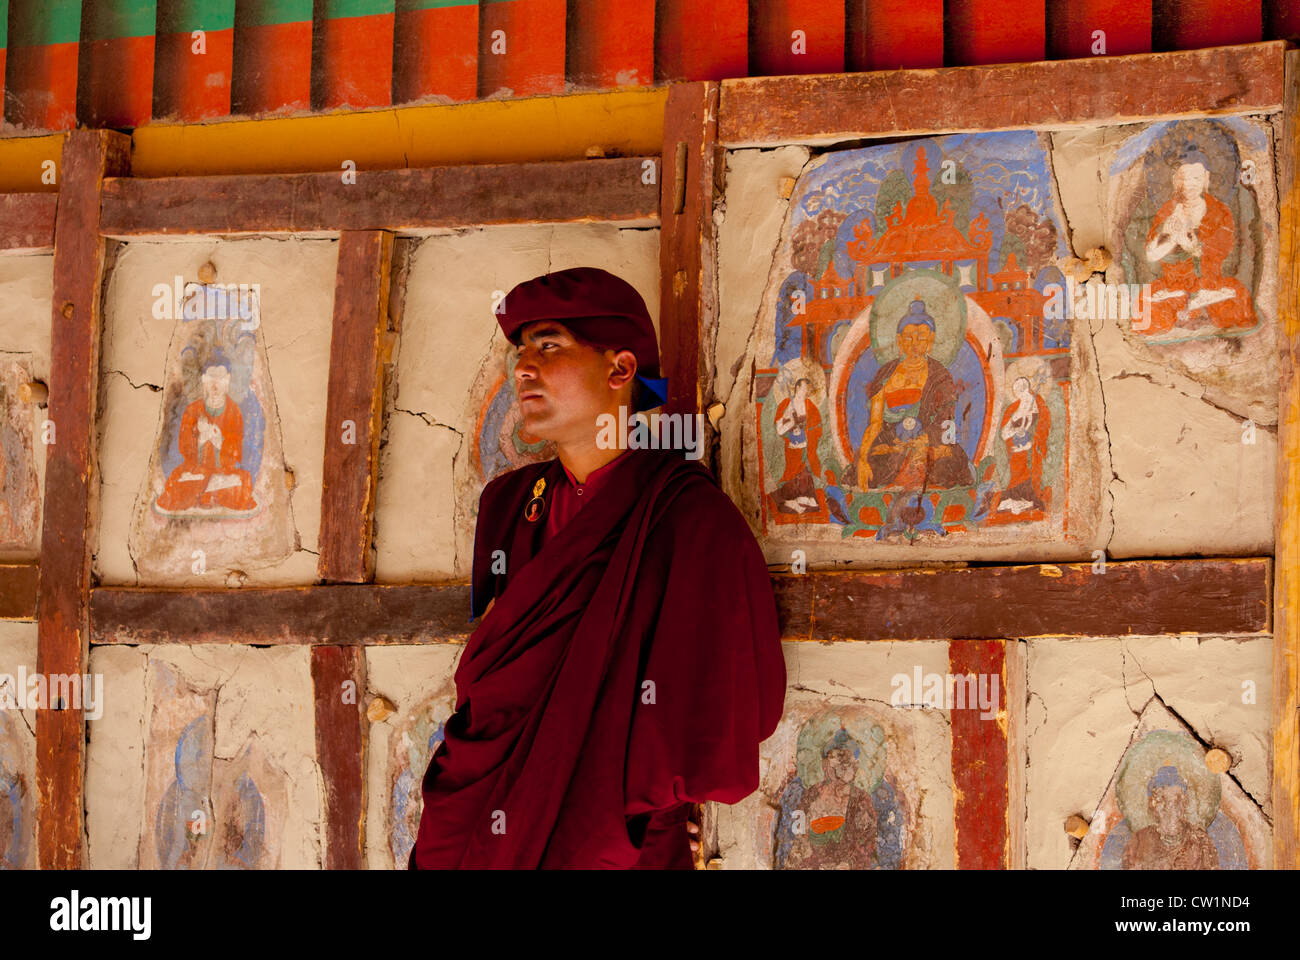 A monk stands in front of a wall covered with paintings of a religious nature at Hemis Monastery, Ladakh, India Stock Photo